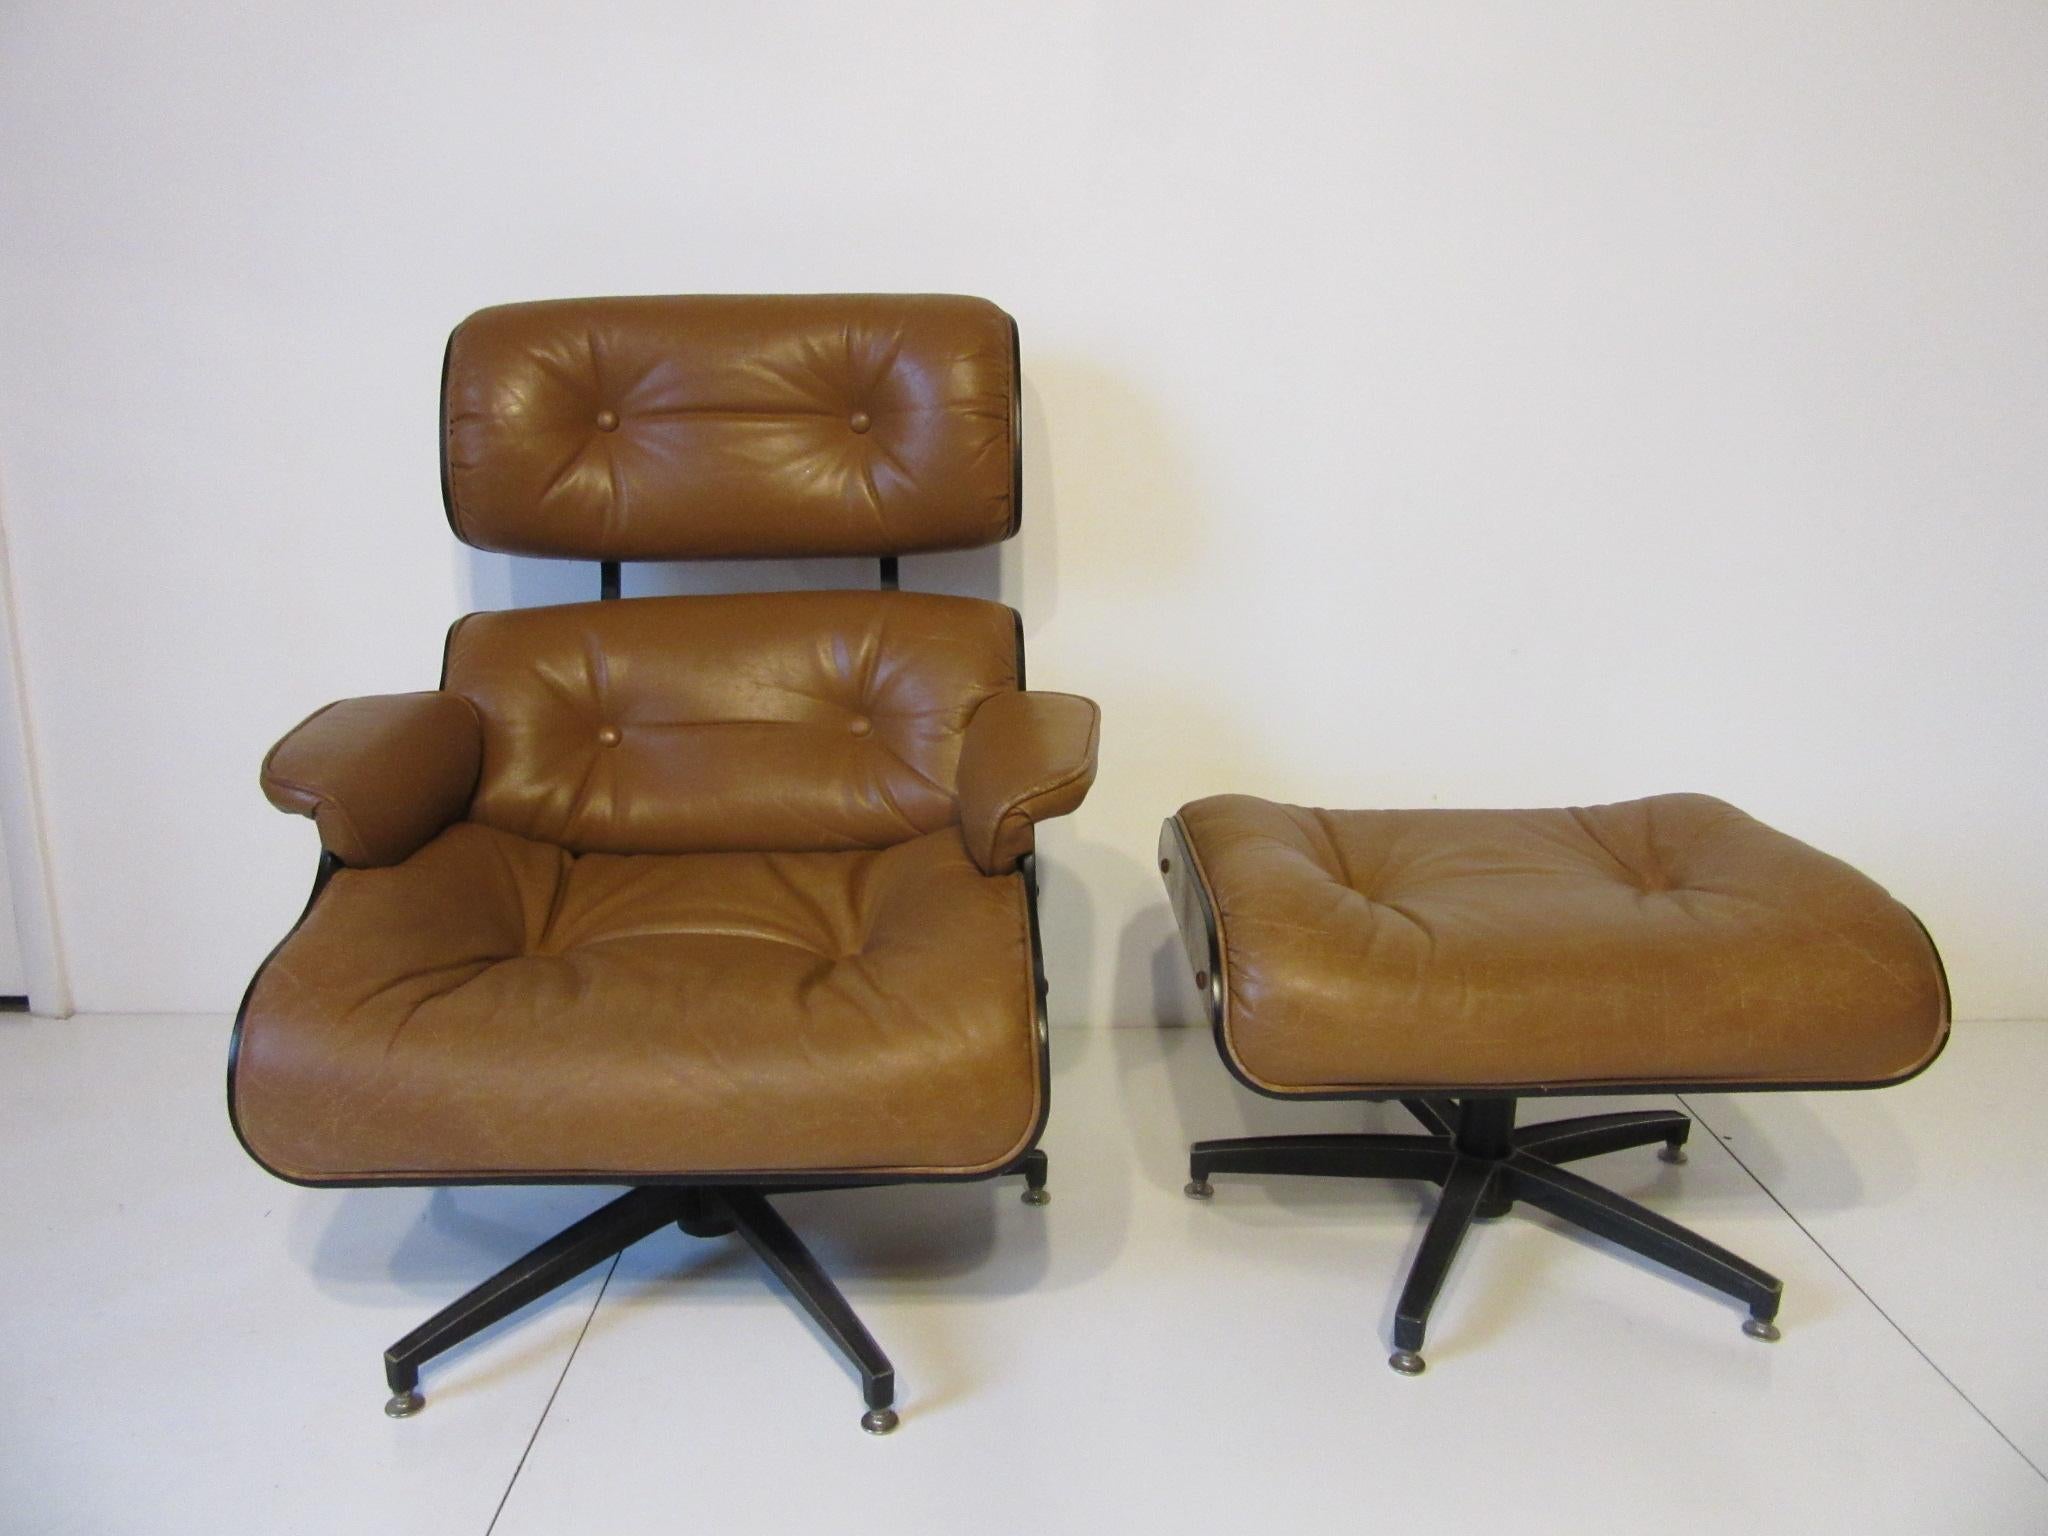 American Selig Leather Lounge Chair or Ottoman in the style of Eames or Herman Miller